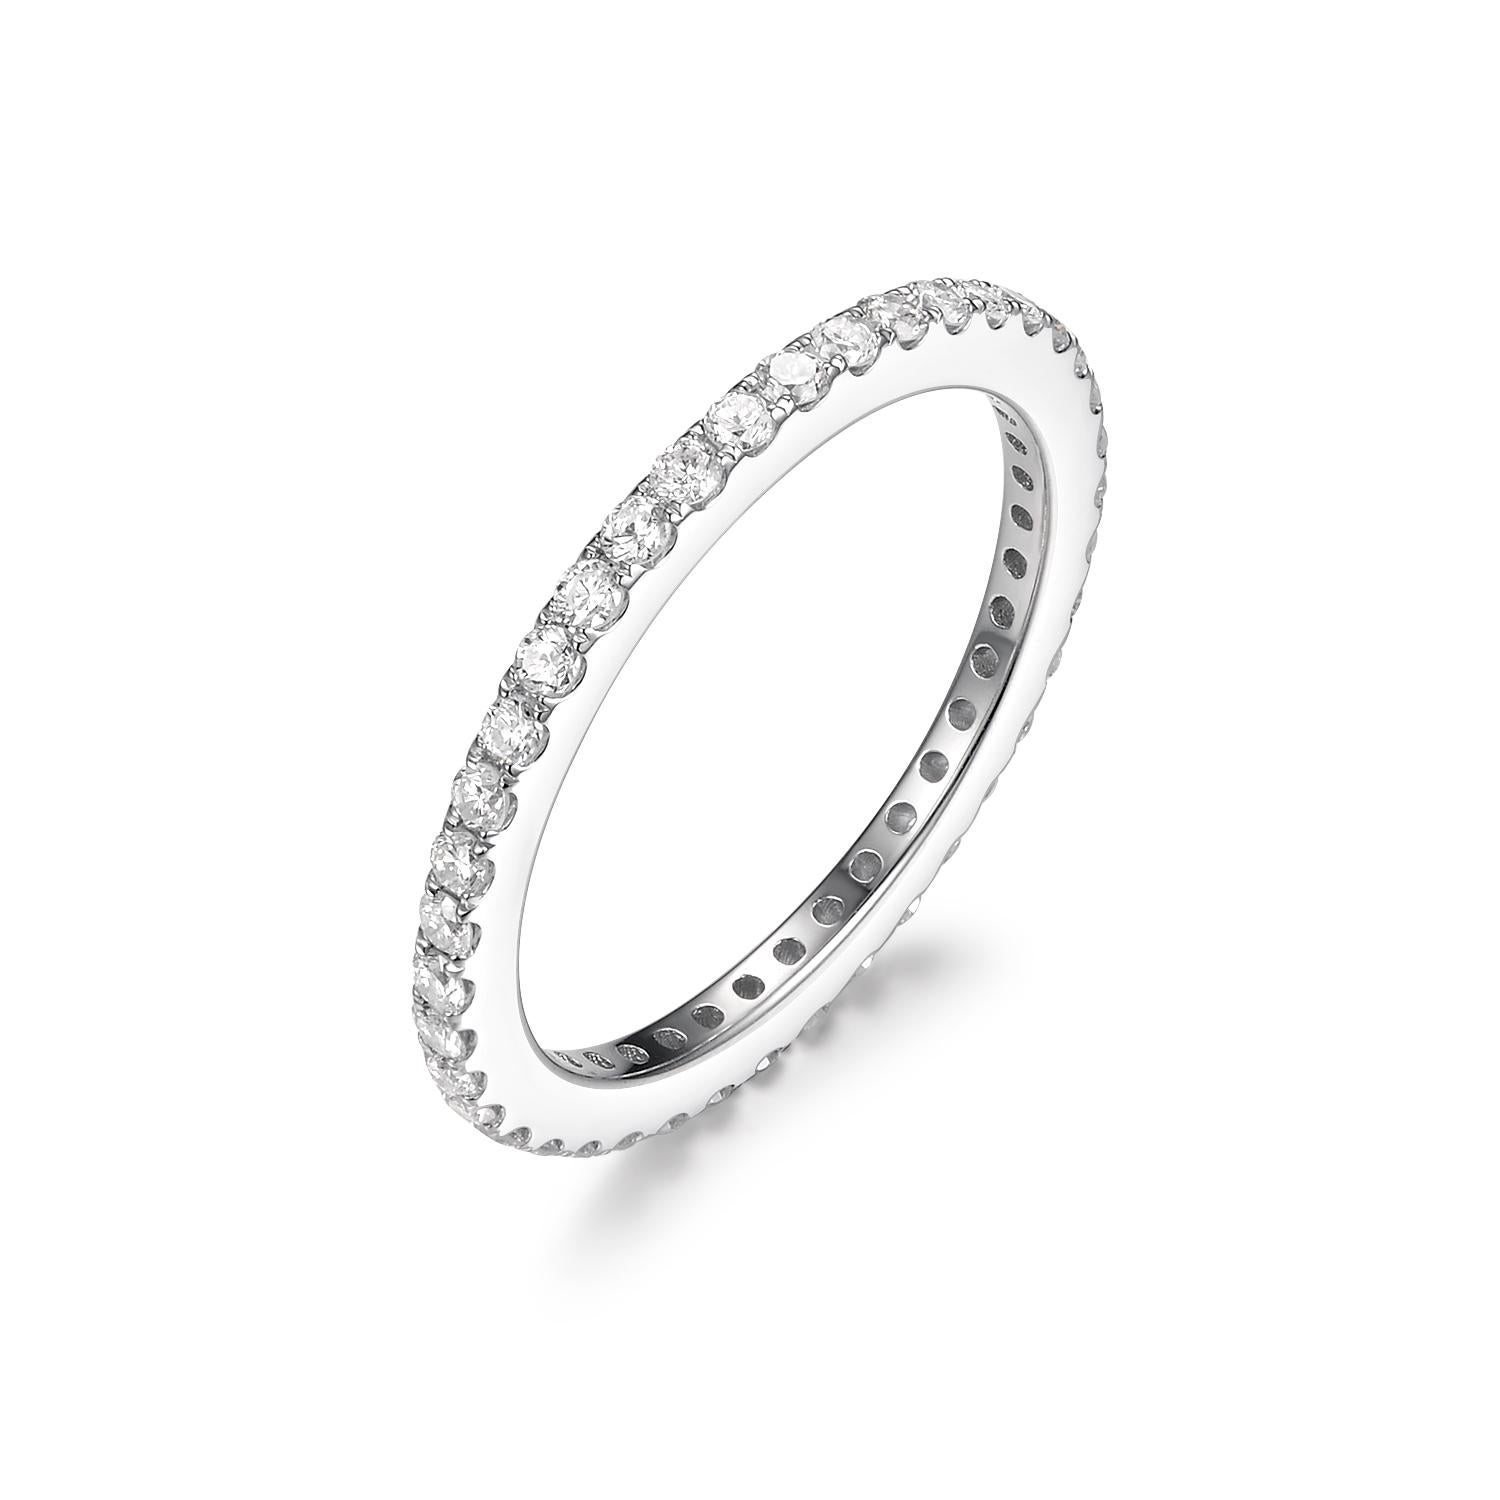 Brilliant Cut 0.56Ct Diamond Band Ring in 18 Karat White Gold For Sale